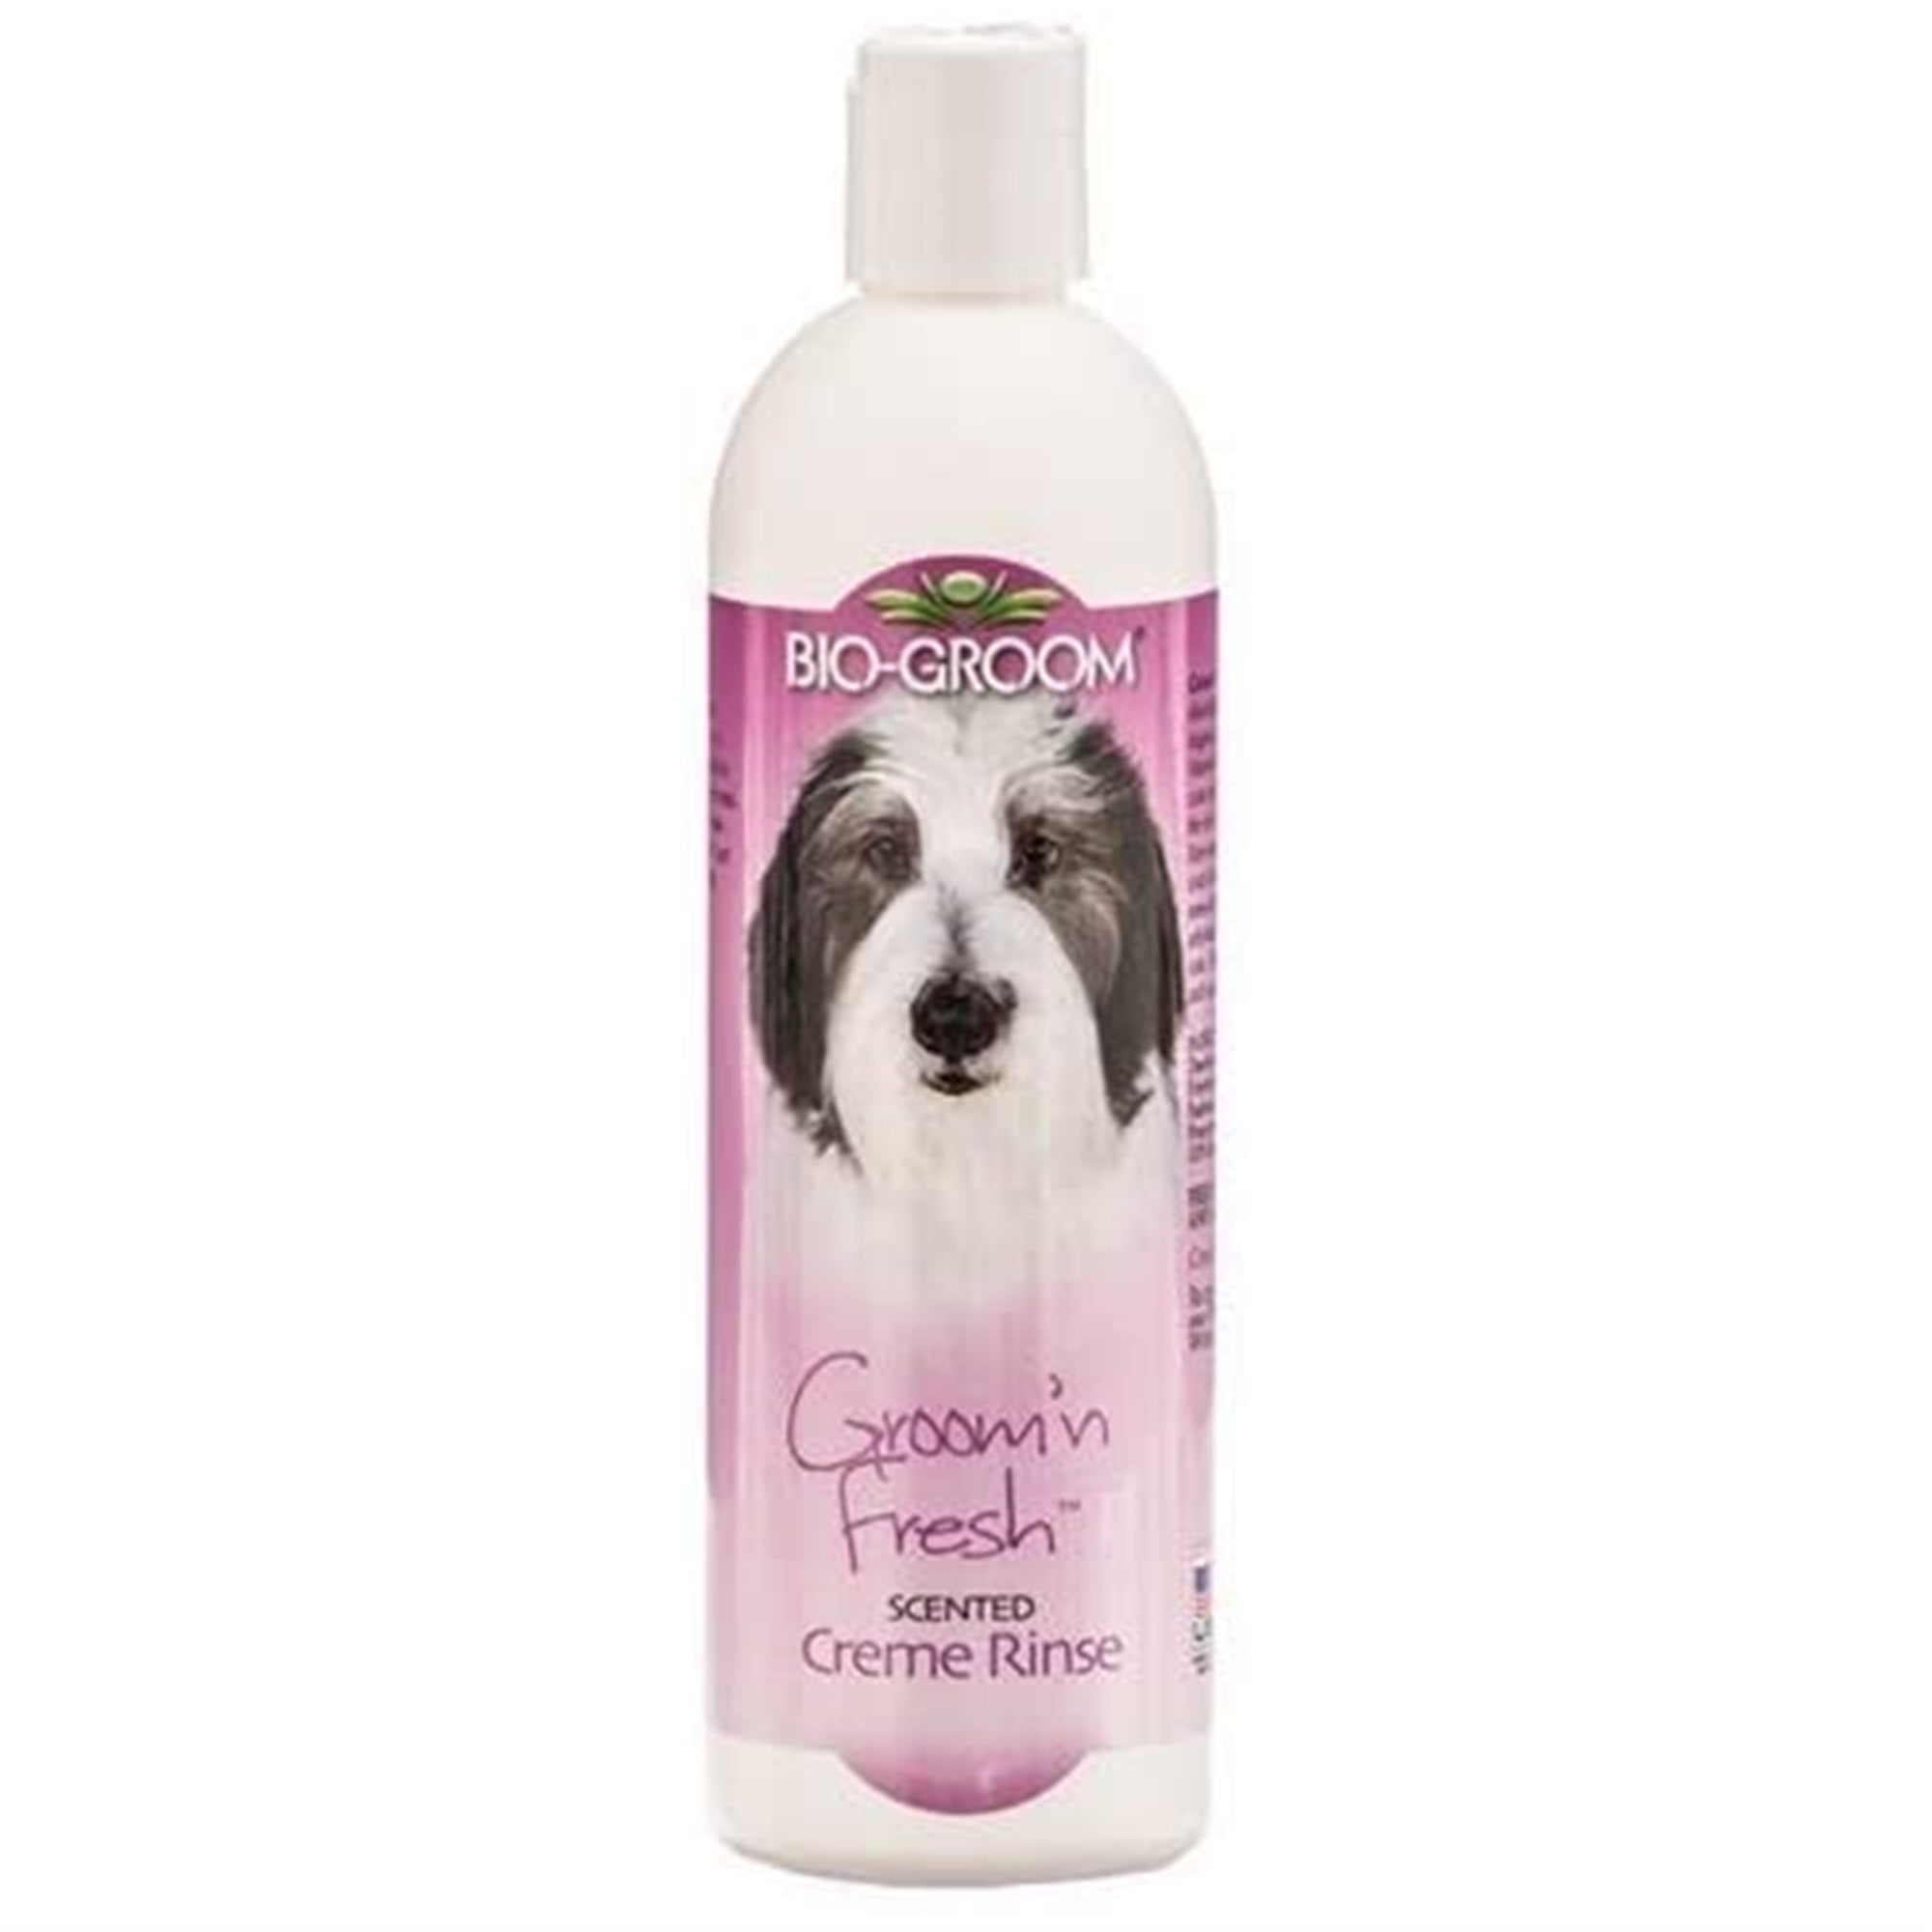 Bio-groom Groom N Fresh Scented Creme Rinse Conditioner For Dogs, 12 oz